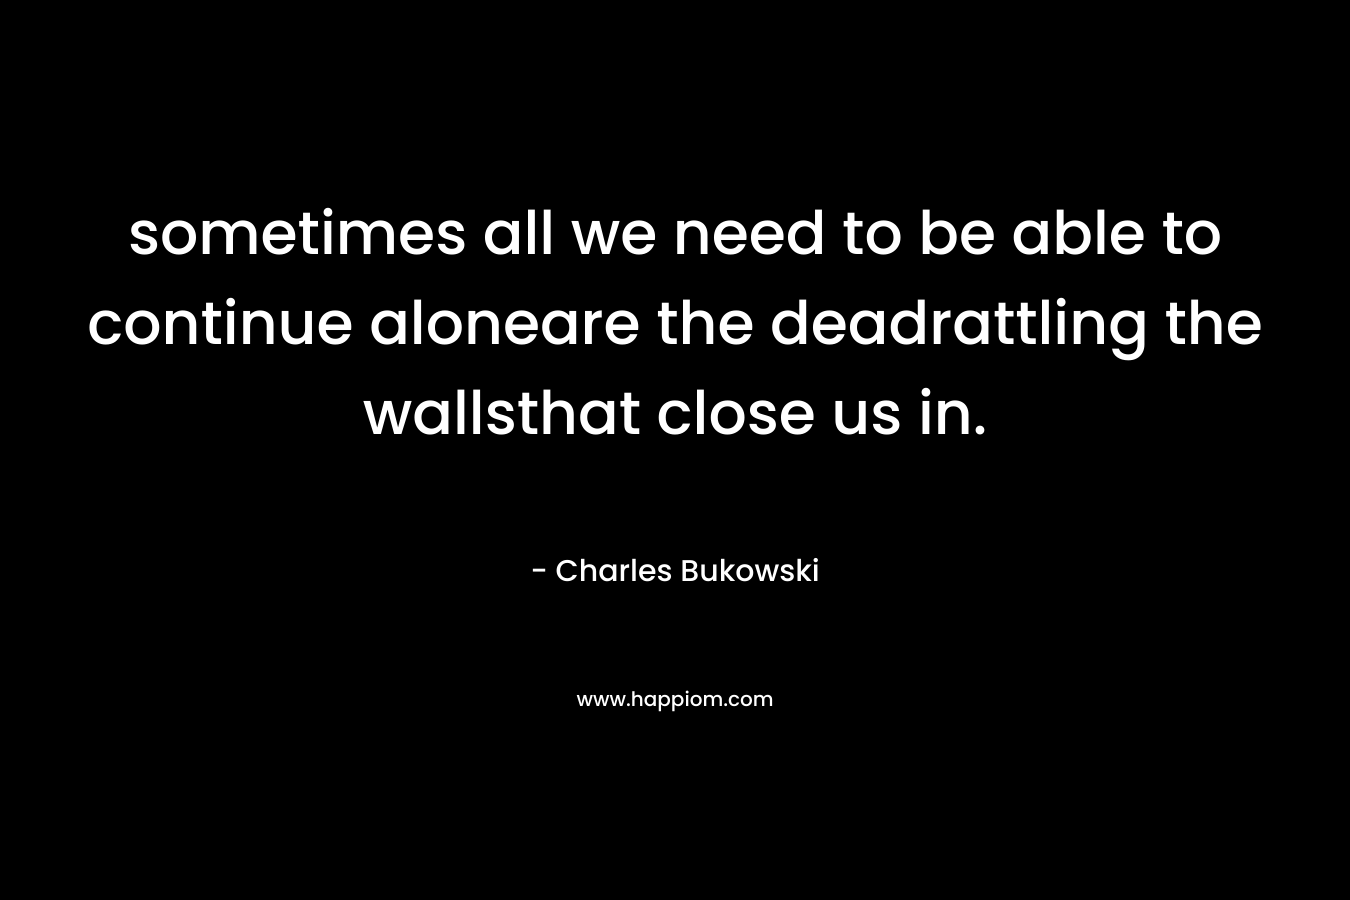 sometimes all we need to be able to continue aloneare the deadrattling the wallsthat close us in.